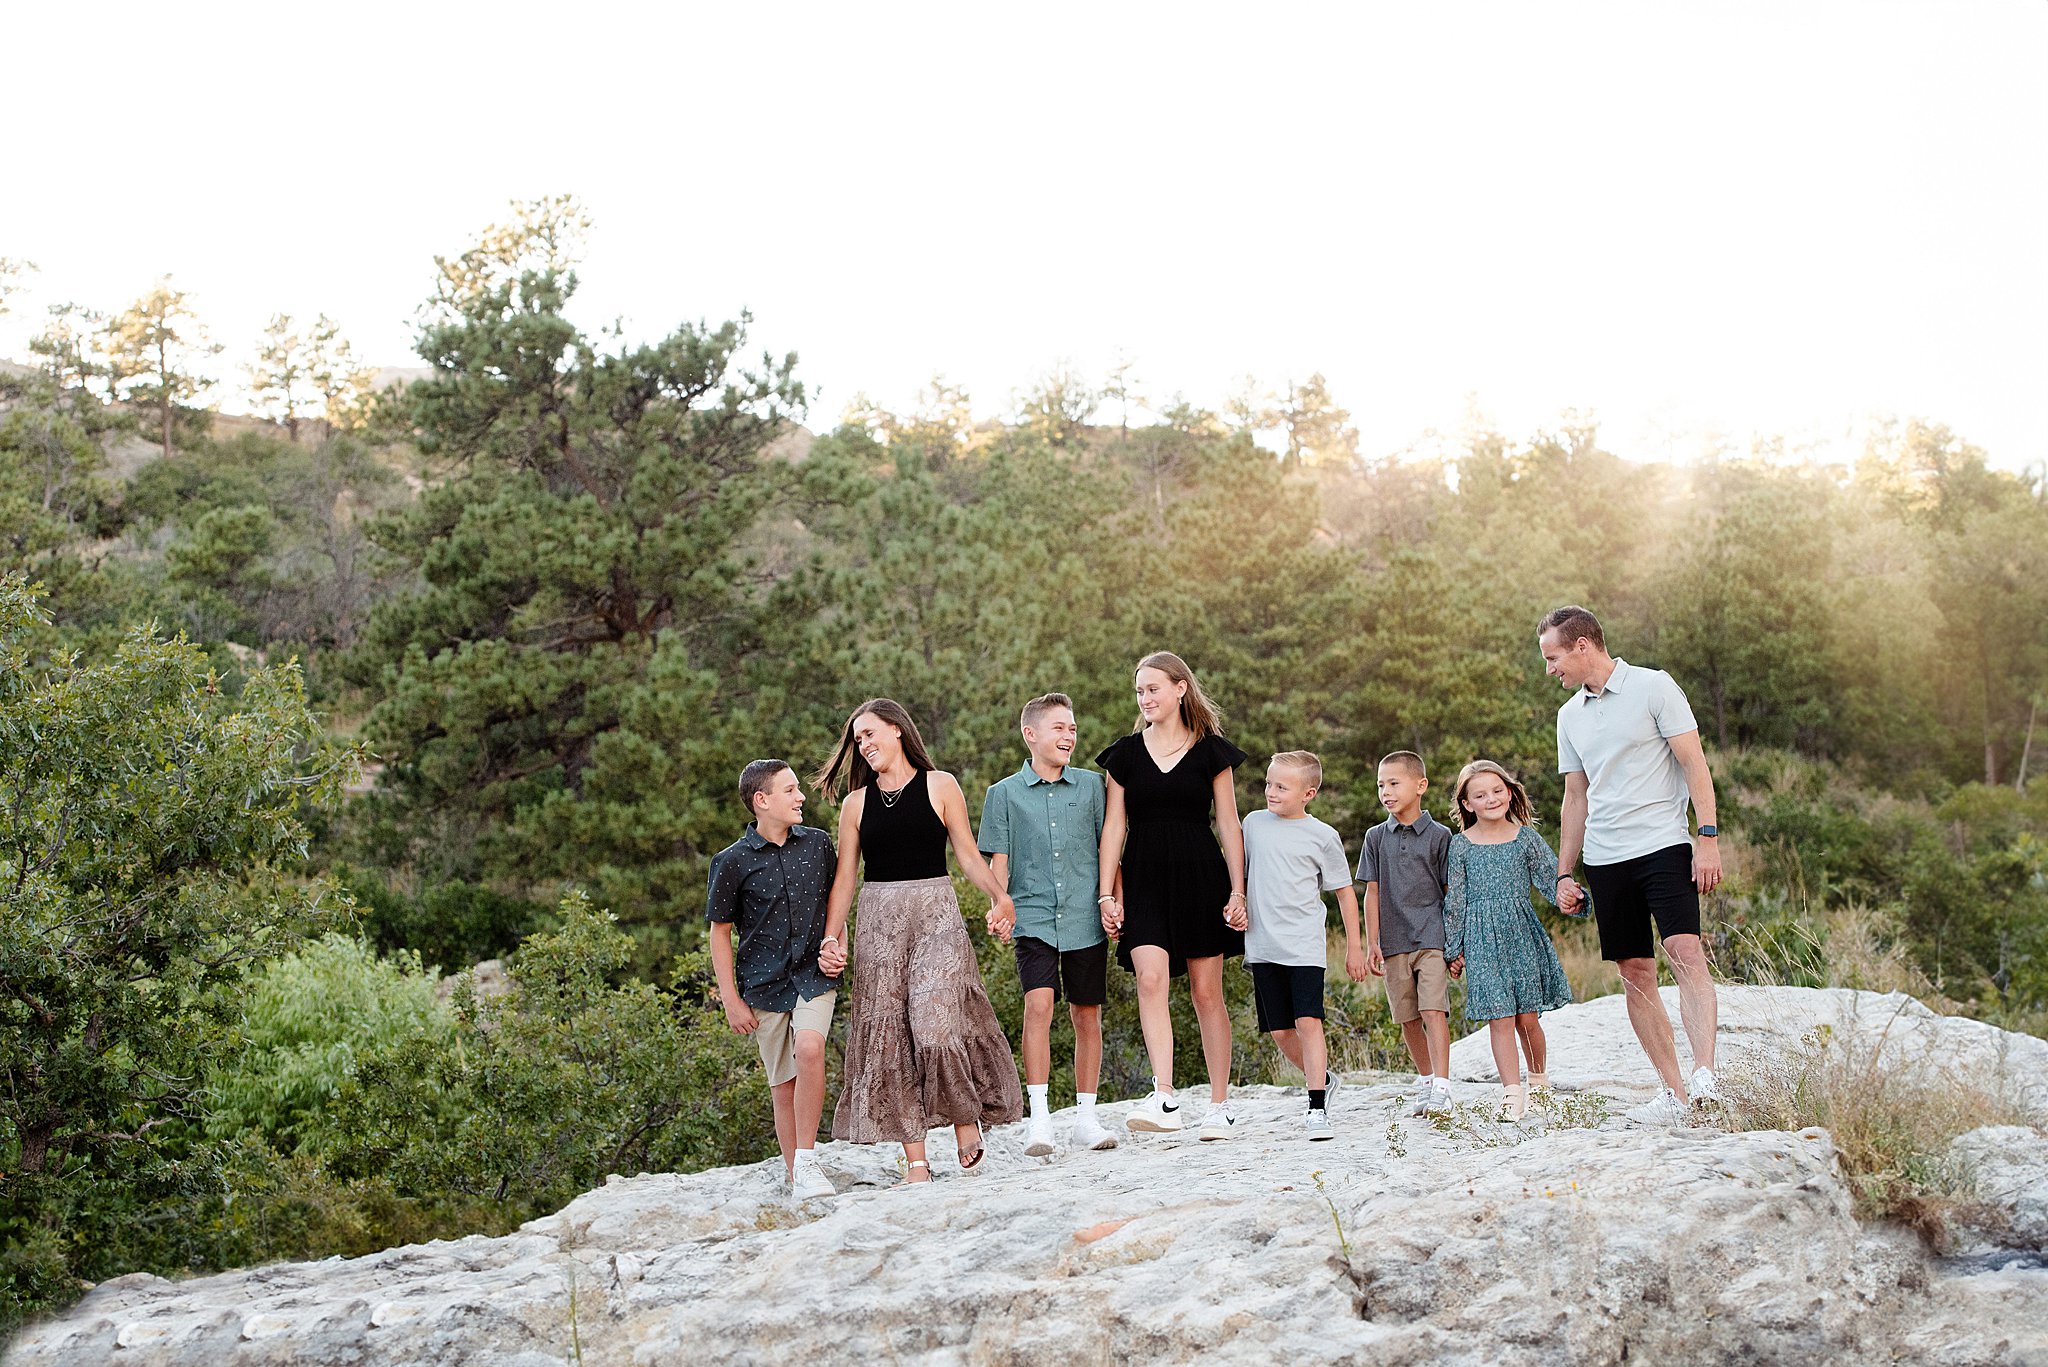 A family of eight walks through a rocky mountain trail holding hands at sunset at ute valley park